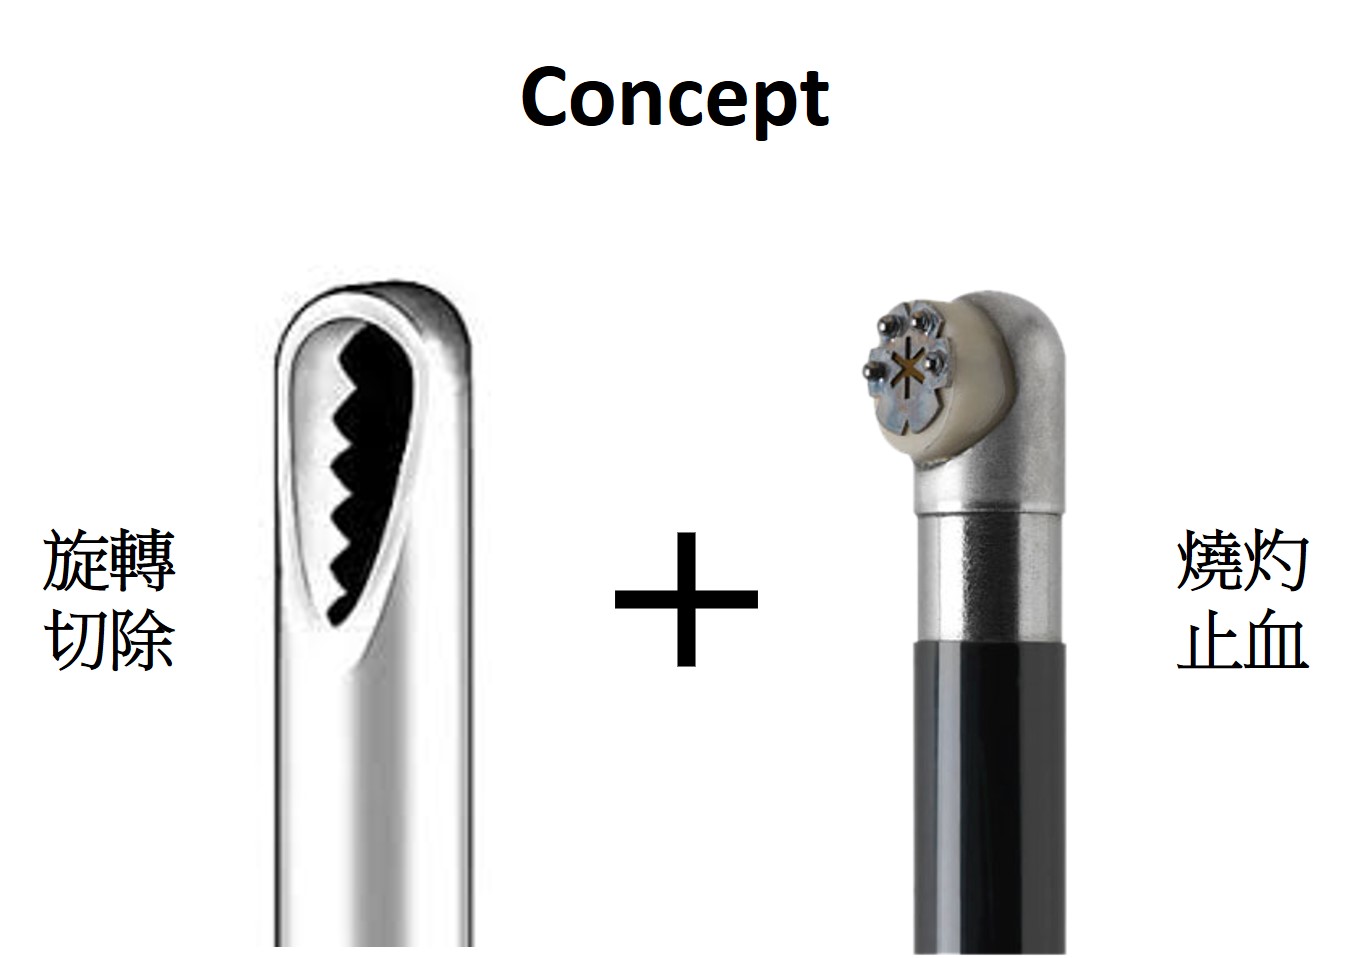 A device combined shaving and coagulation